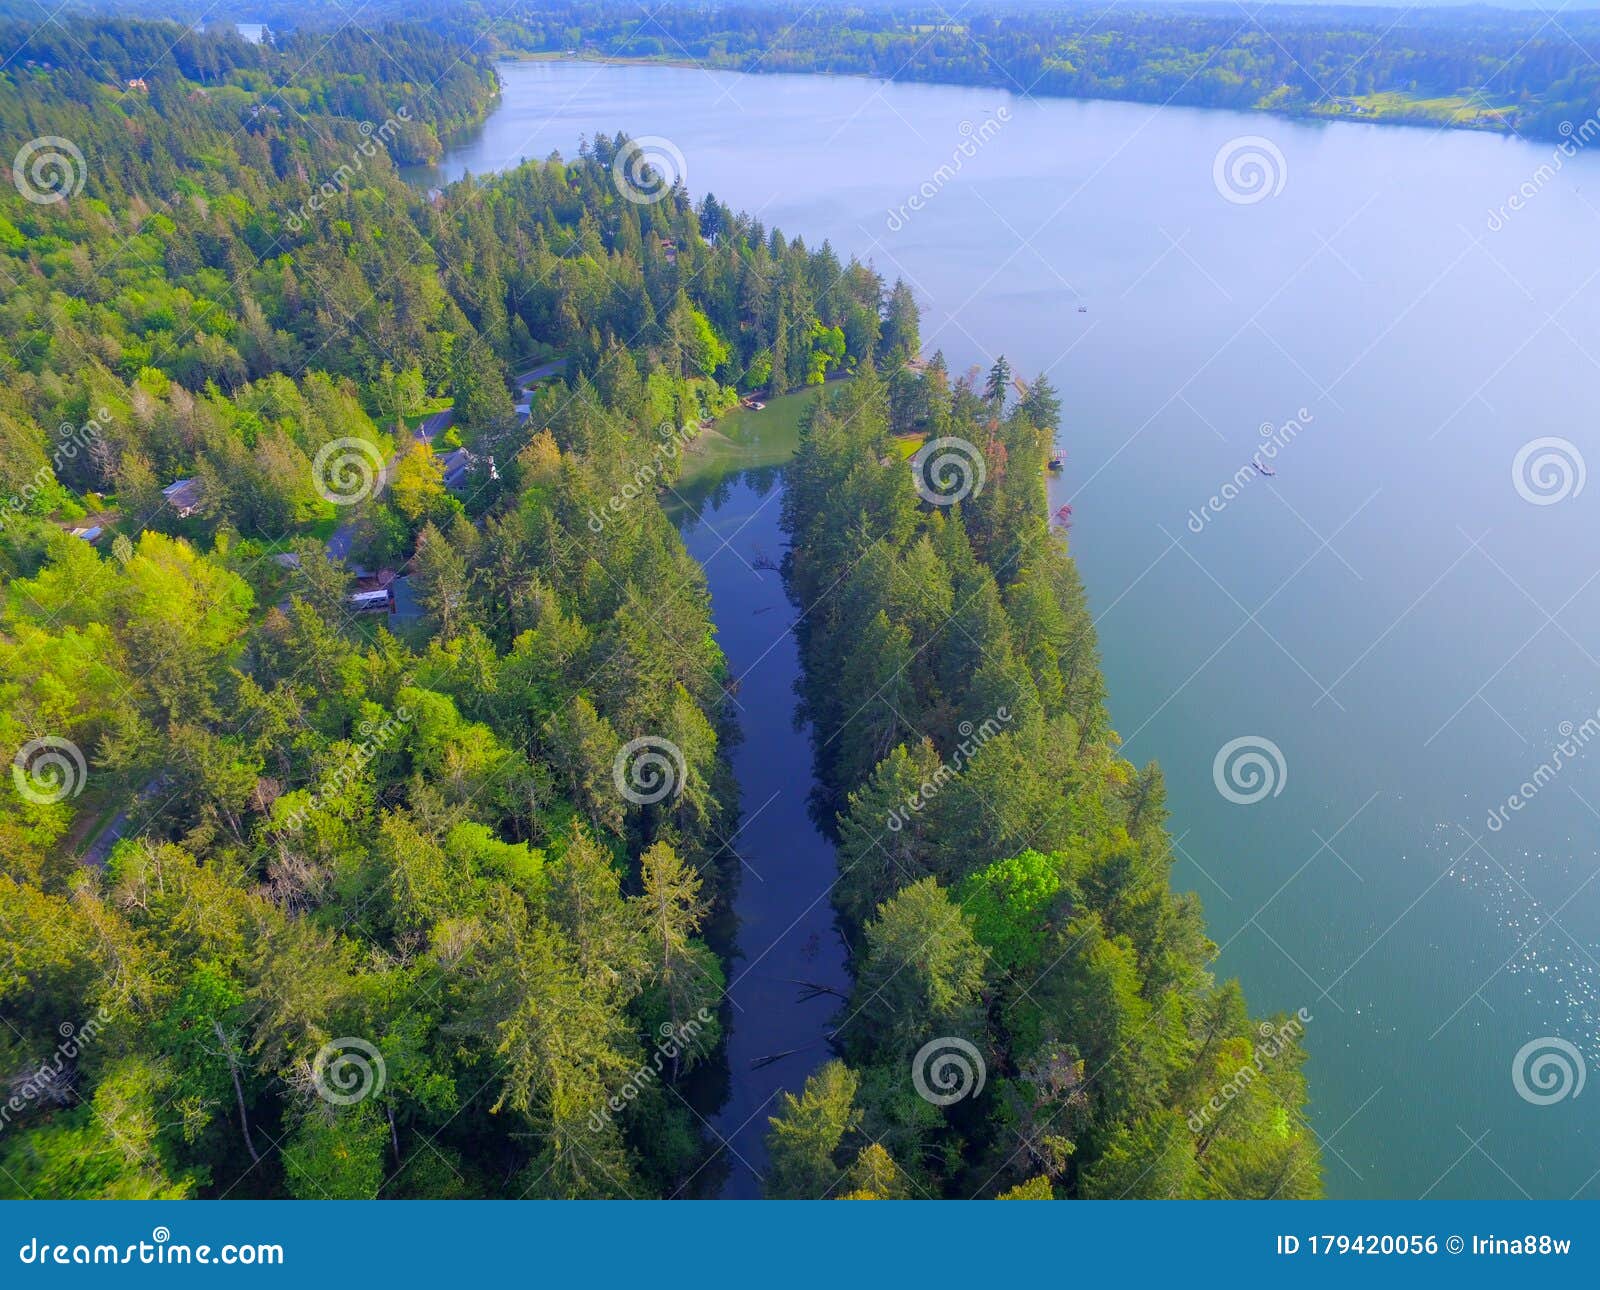 Olympic Penninsula Aerial Photos of the Puget Sound and Land with ...